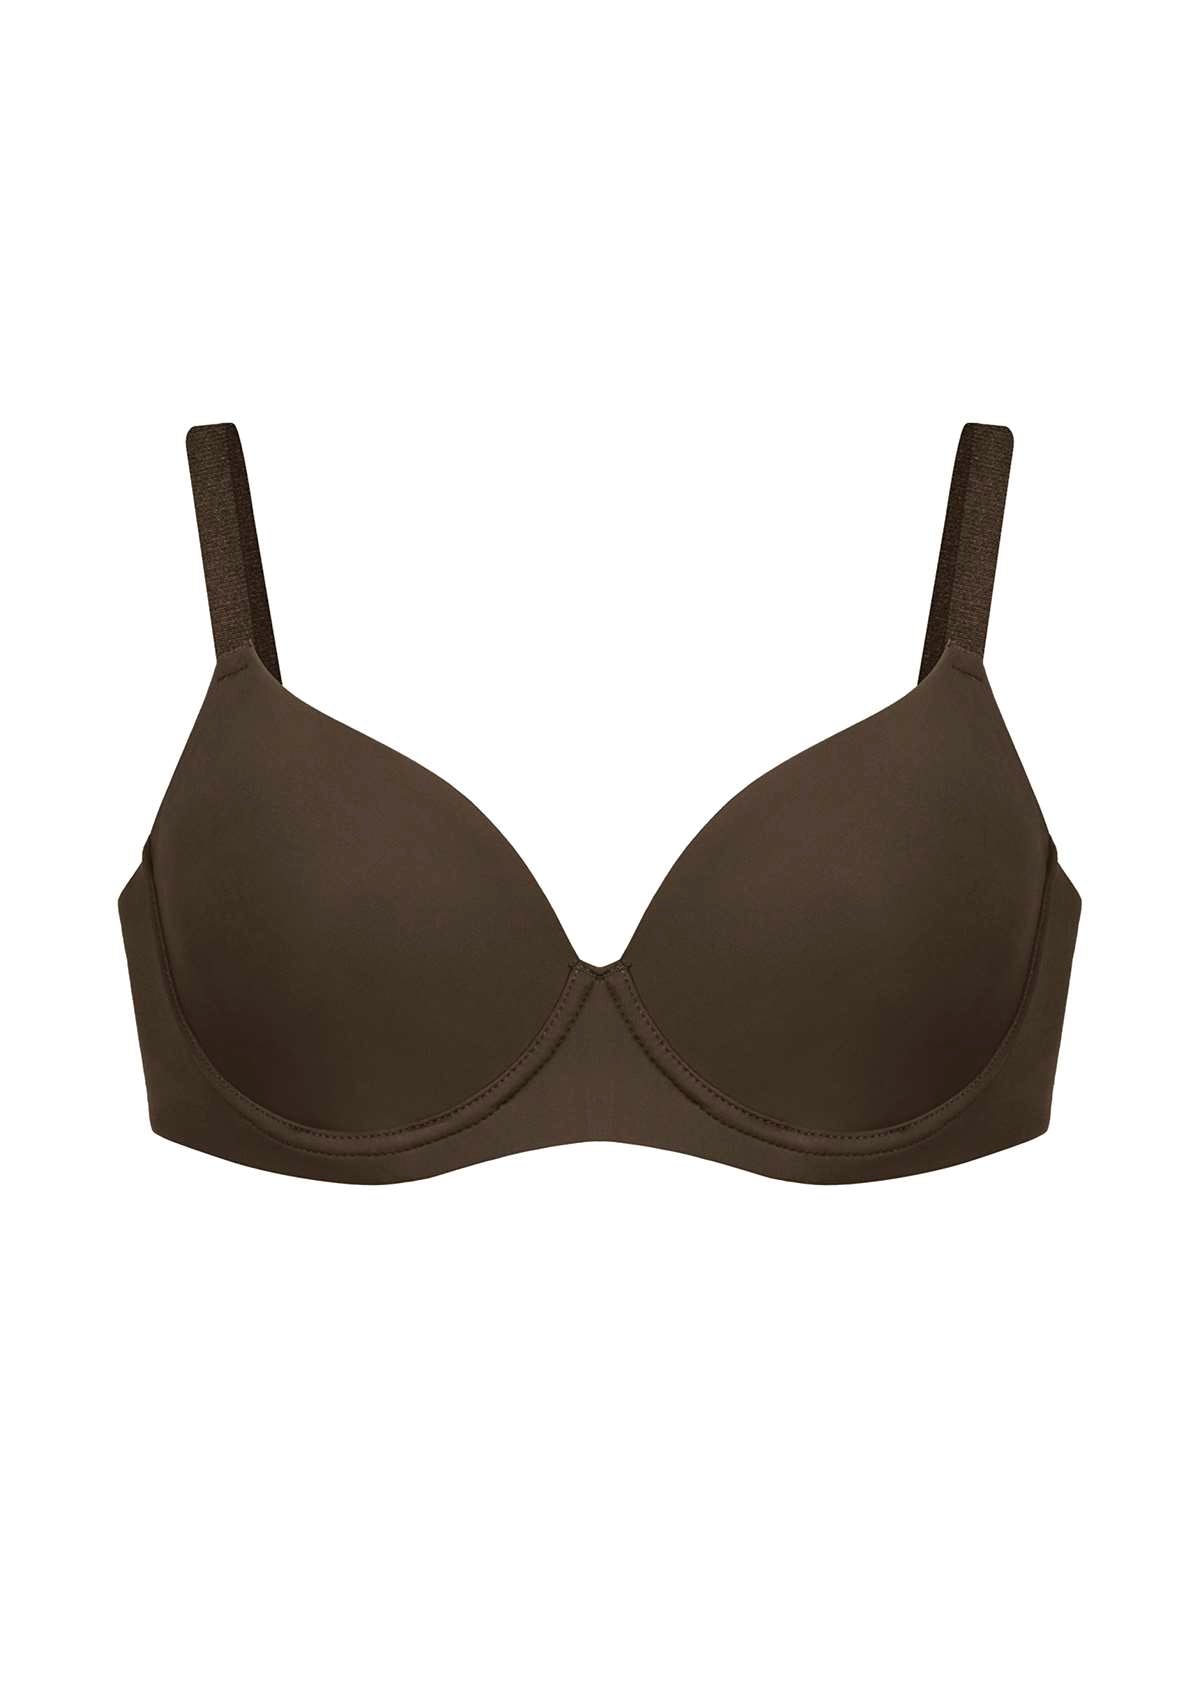 HSIA Gemma Smooth Supportive Padded T-shirt Bra - For Full Figures - Cocoa Brown / 34 / D